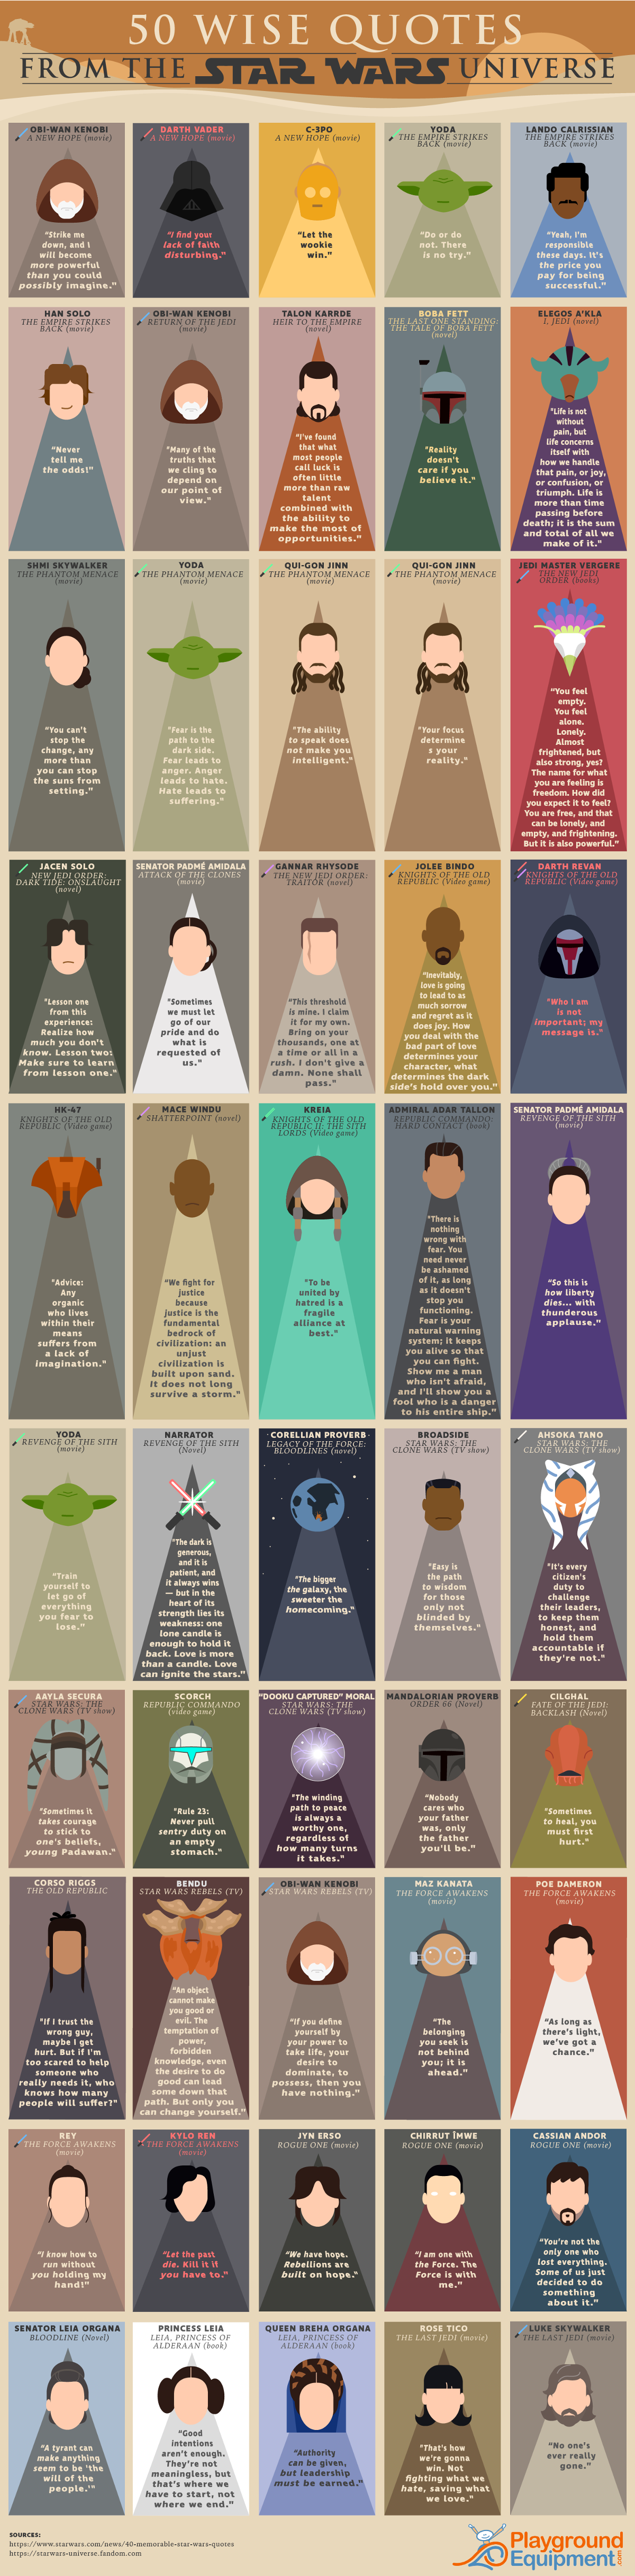 50 Wise Quotes from the Star Wars Universe #infographic